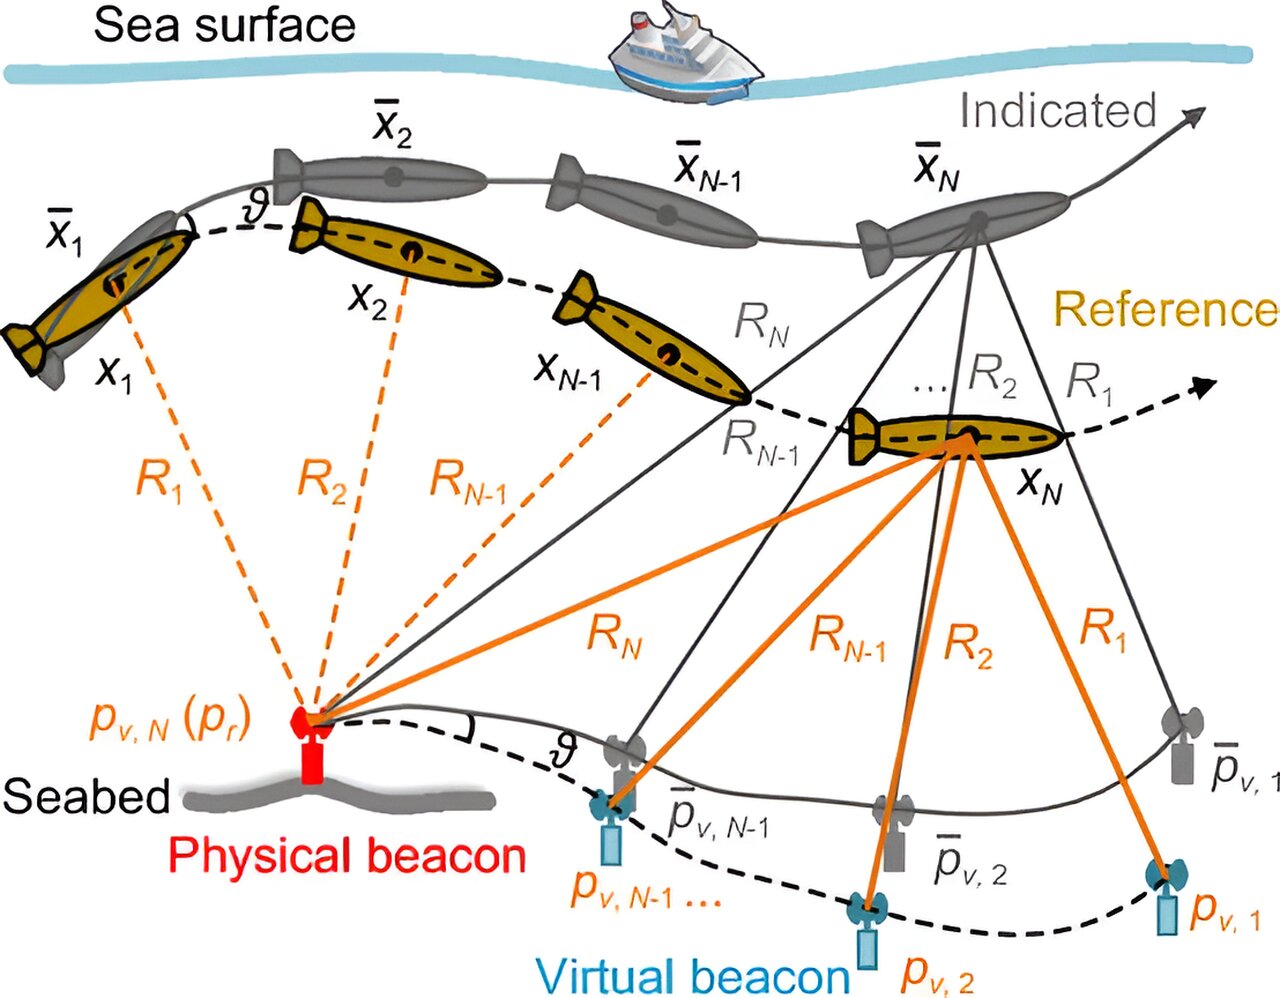 #Exploration in underwater navigation using acoustic beacons